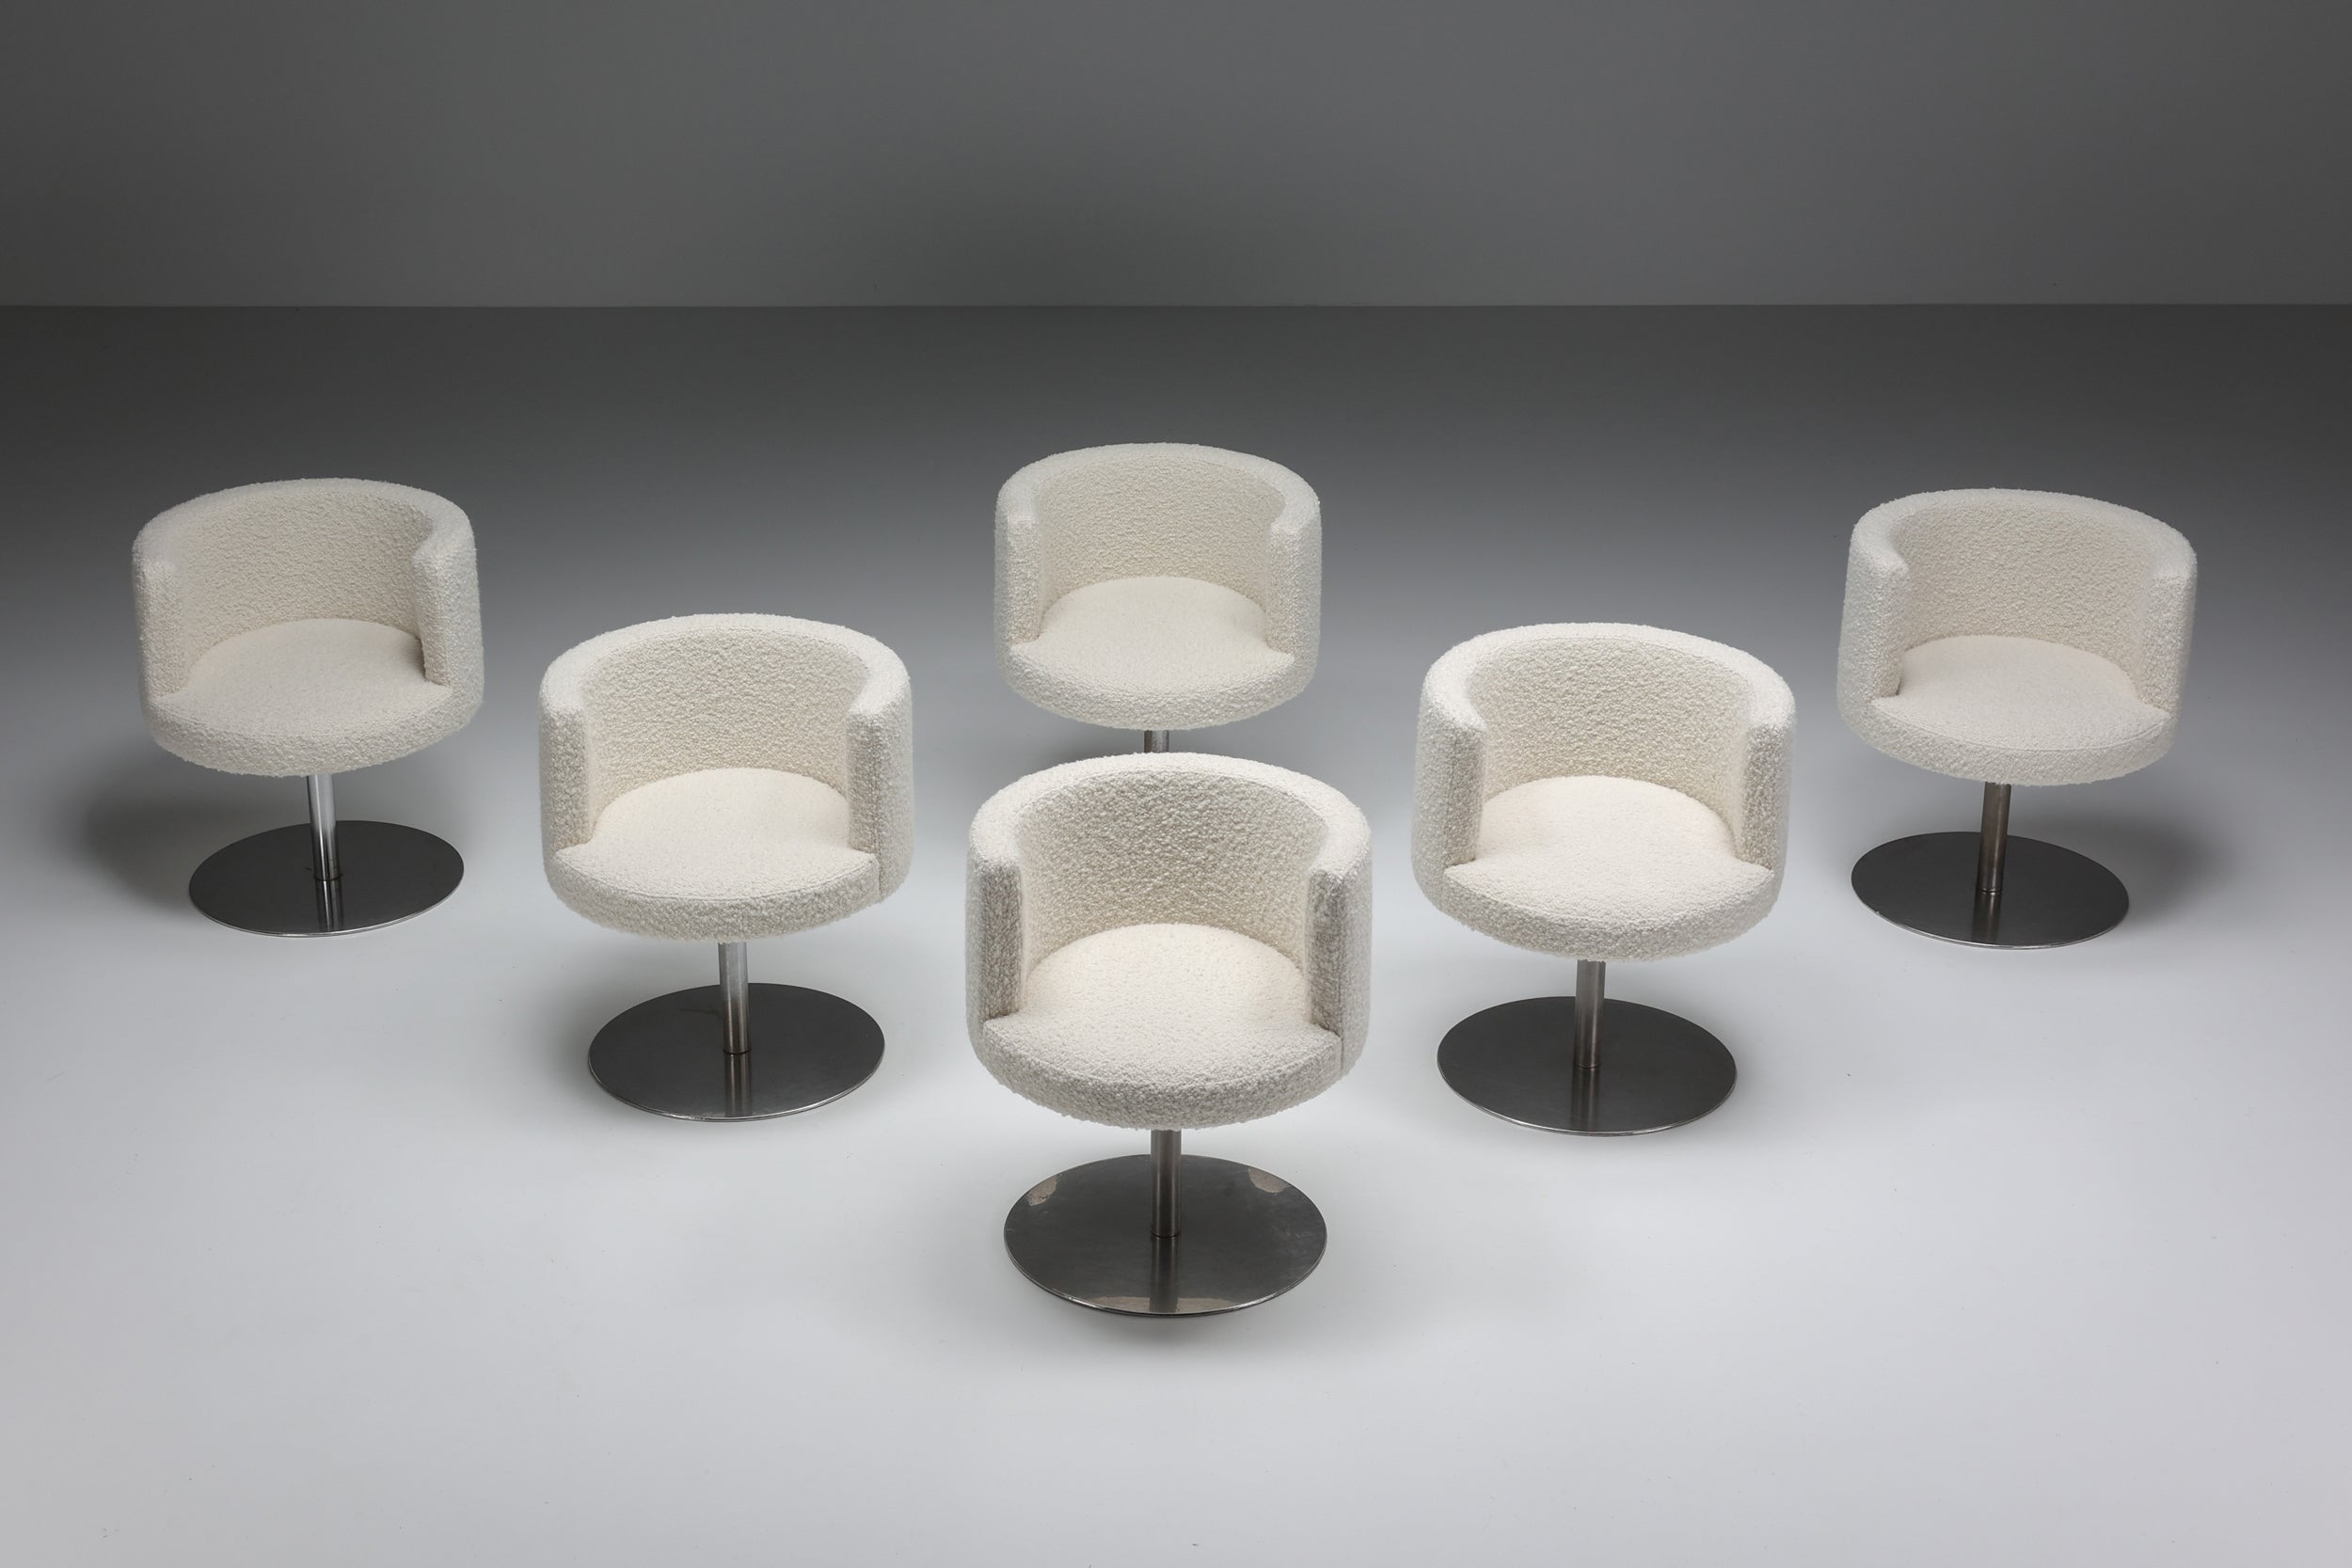 1960's; Italy; Mid-Century Modern; Italian Design; Formanova; Gianni Moscatelli; Dining chair set; 

Gianni Moscatelli Money Swivel Chairs for Formanova, made in the 1960s in Italy. Set of seven dining chairs all newly upholstered in white boucle